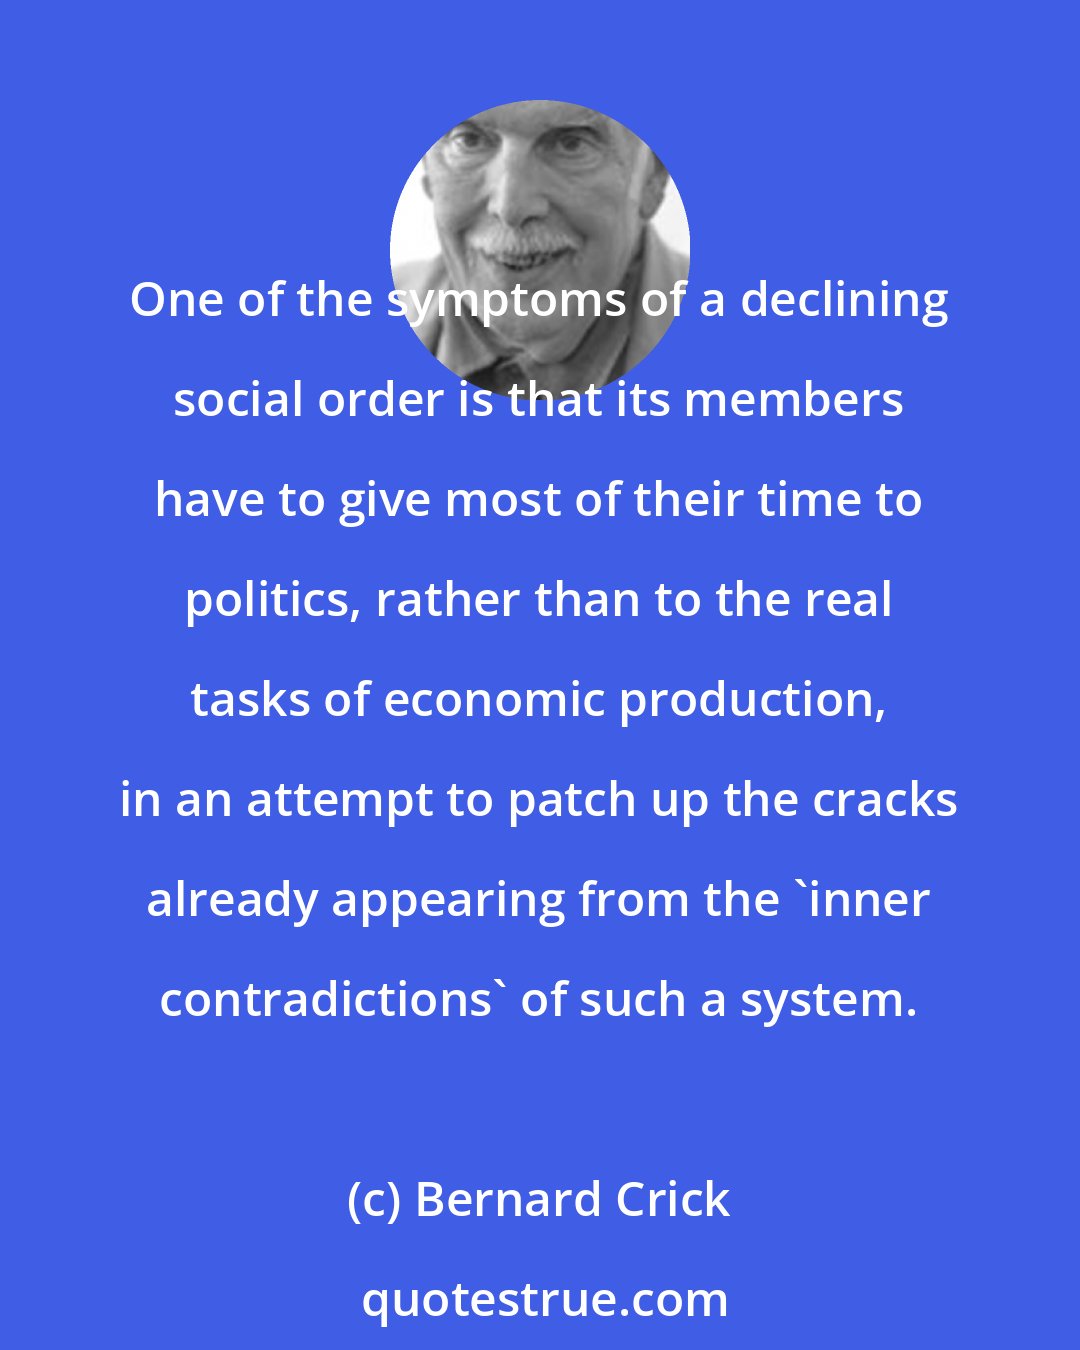 Bernard Crick: One of the symptoms of a declining social order is that its members have to give most of their time to politics, rather than to the real tasks of economic production, in an attempt to patch up the cracks already appearing from the 'inner contradictions' of such a system.